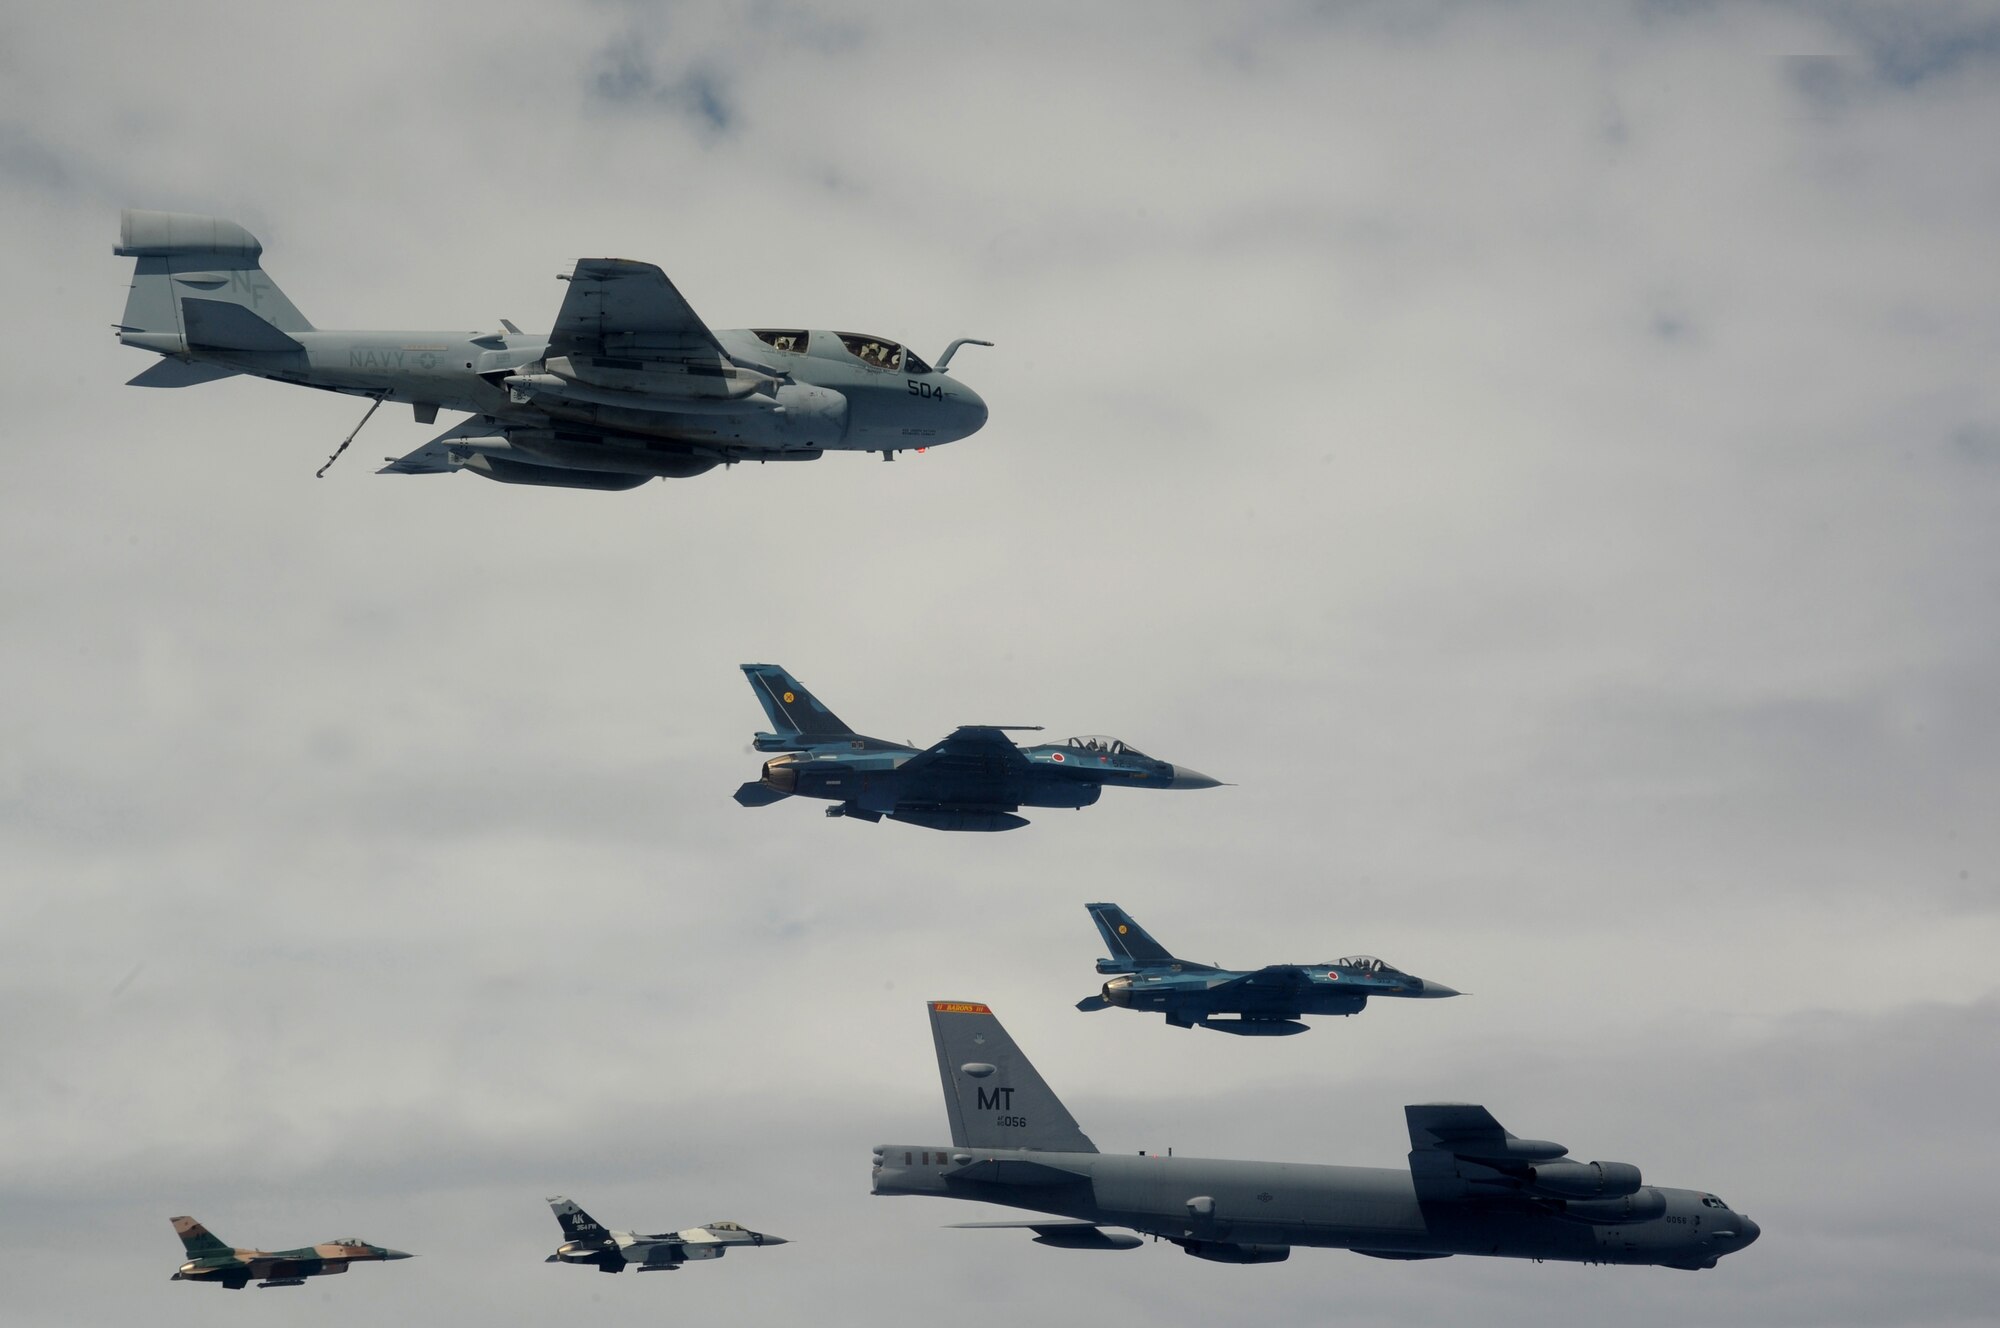 A B-52 Stratofortress currently deployed to Andersen AFB, Guam from the 23rdExpeditionary Bomb Squadron, leads a formation Feb. 10 of Japanese Air Self Defense Force F-2s from the 6th Squadron, Tsuiki Air Base, USAF  F-16 Fighting Falcons from the 18th Aggressor Squadron, Eielson Air Force Base, Alaska, and Navy EA-6B Prowlers from VAQ-136 Carrier Air Wing Five, Atsugi, Japan over Guam during Cope North 09-1 at Andersen Air Force Base from Feb. 2-13. The Cope North exercise is one of the longest-running series of exercises in the Pacific theater.  Since the first Cope North exercise in 1978, thousands of American and Japanese personnel have honed skills that are vital to maintaining a high level of readiness. This will be the tenth time the United States and Japan have held a Cope North exercise on Guam, and it will be the fourth time that the JASDF will use live ordnance.(U.S. Air Force photo/ Master Sgt. Kevin J. Gruenwald) released      